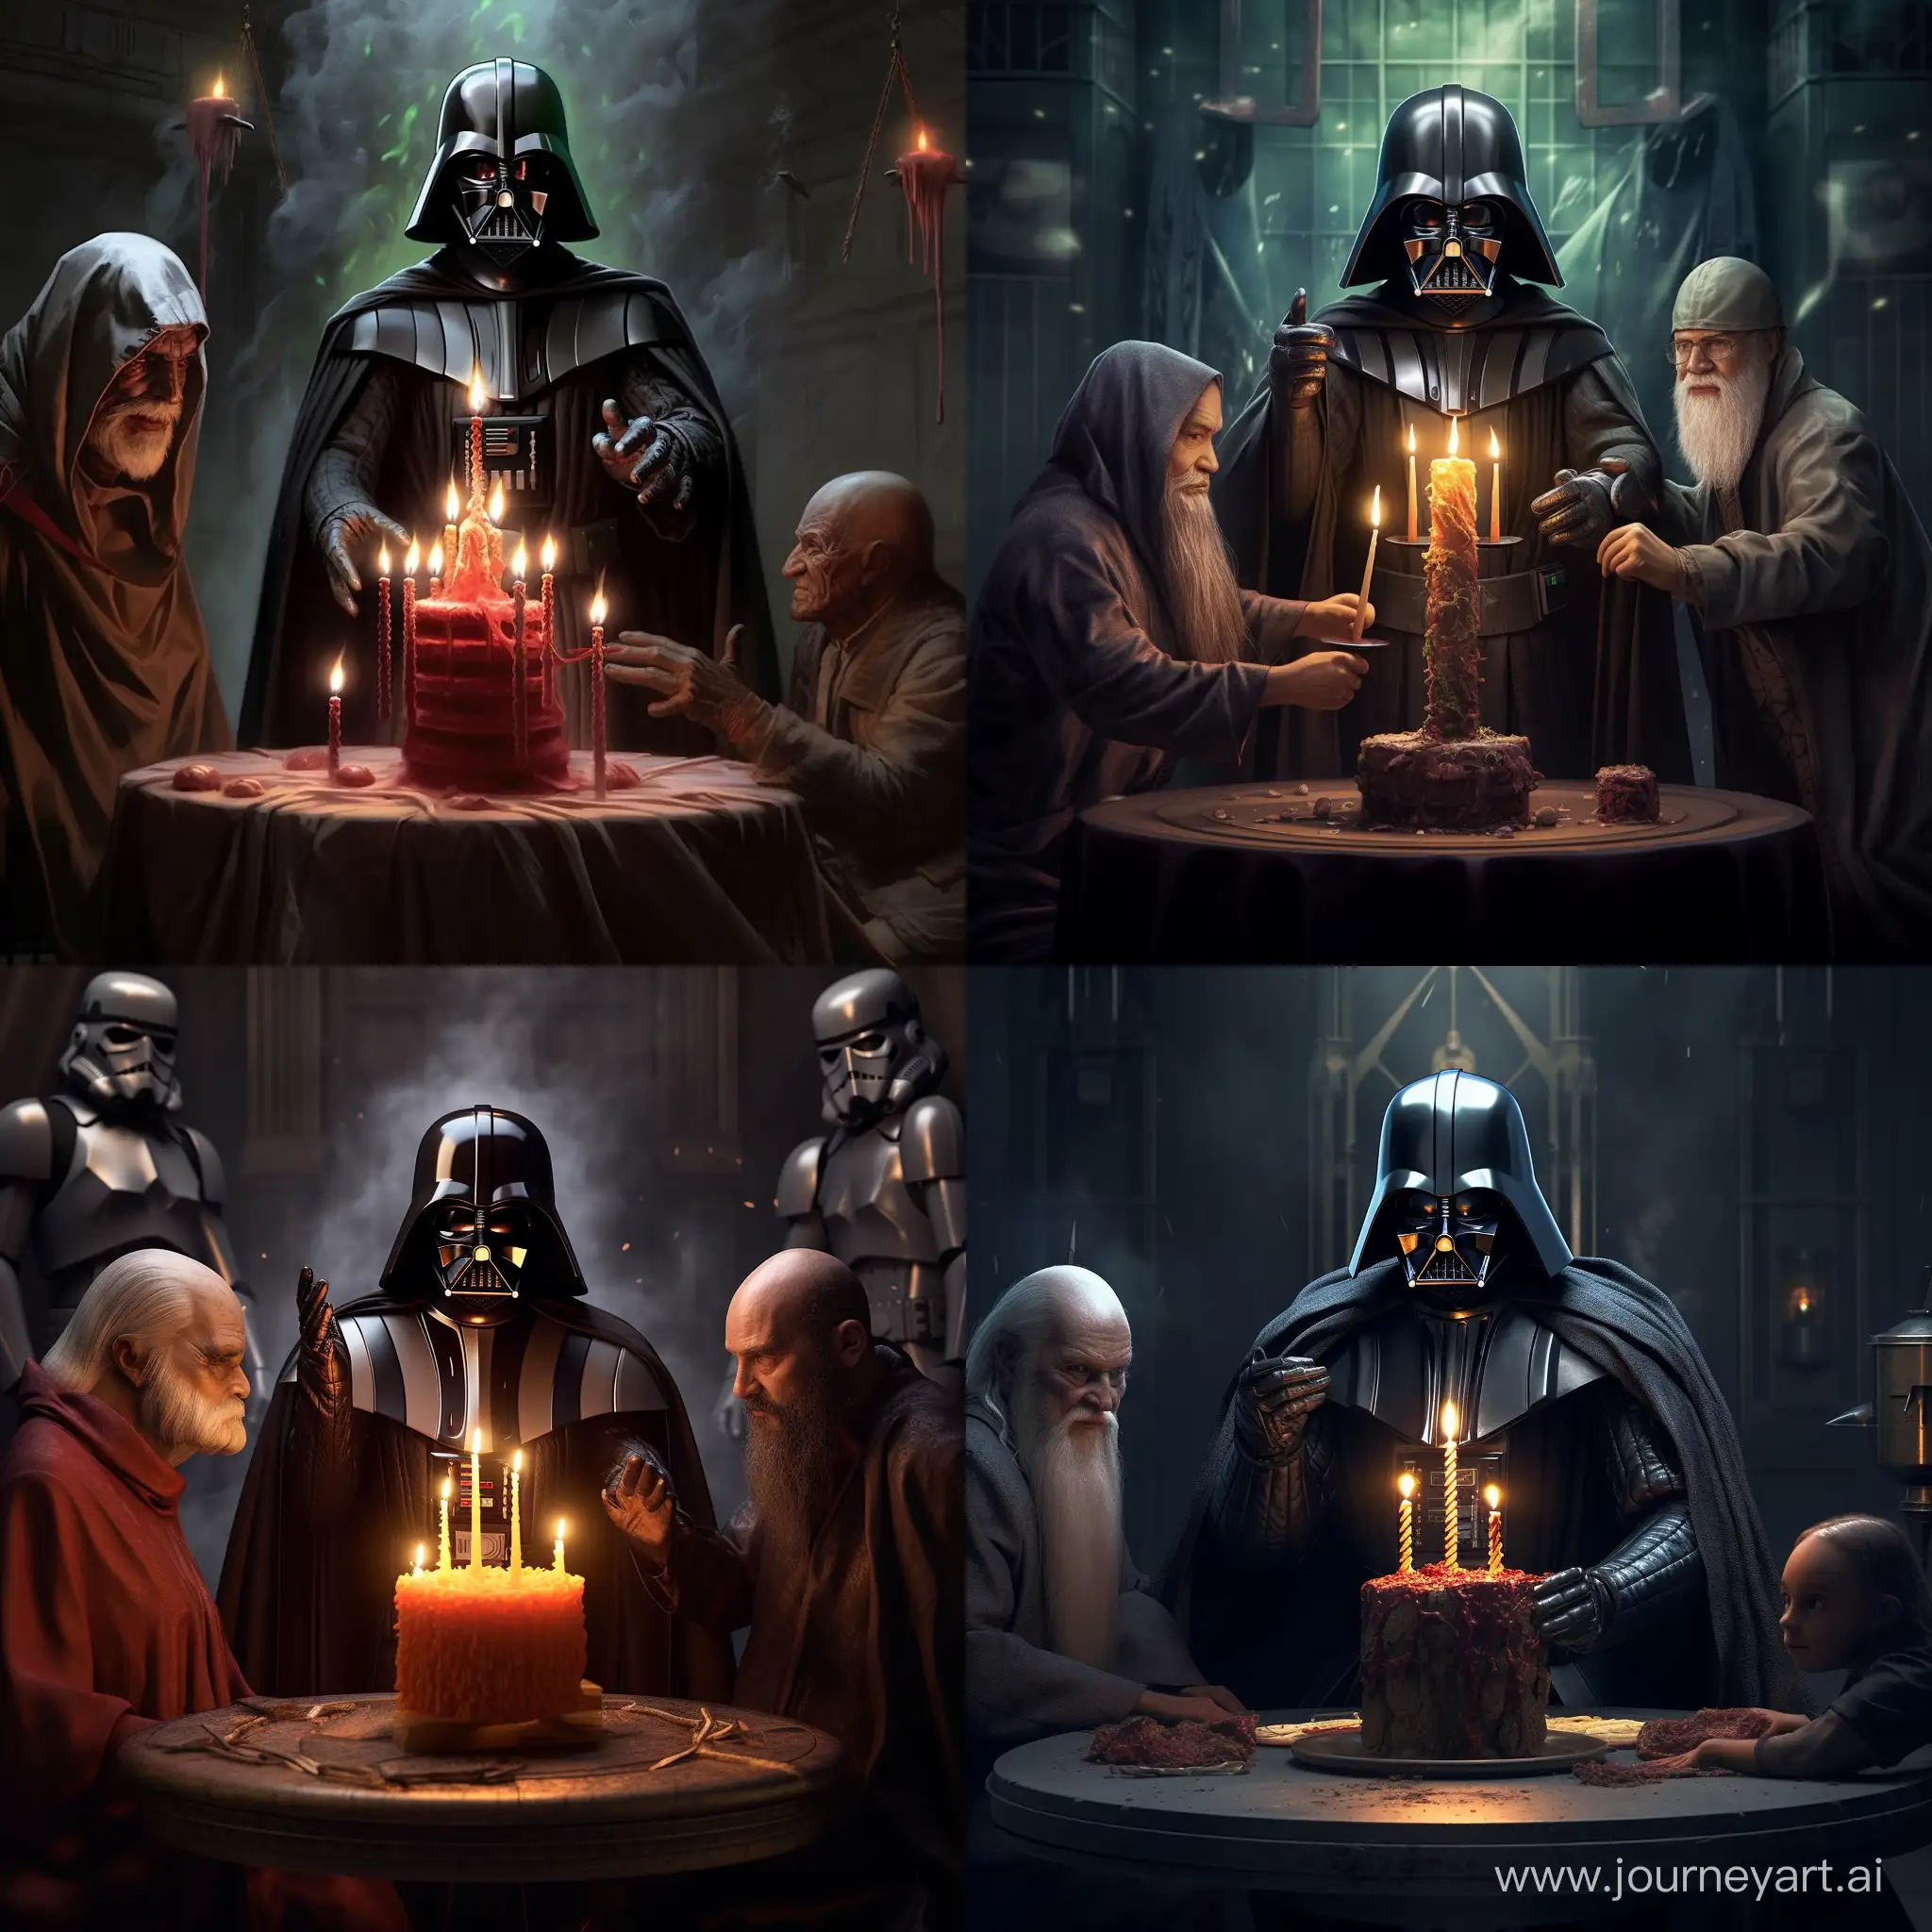 Wizardly-Birthday-Celebration-with-Dumbledore-Voldemort-and-Darth-Vader